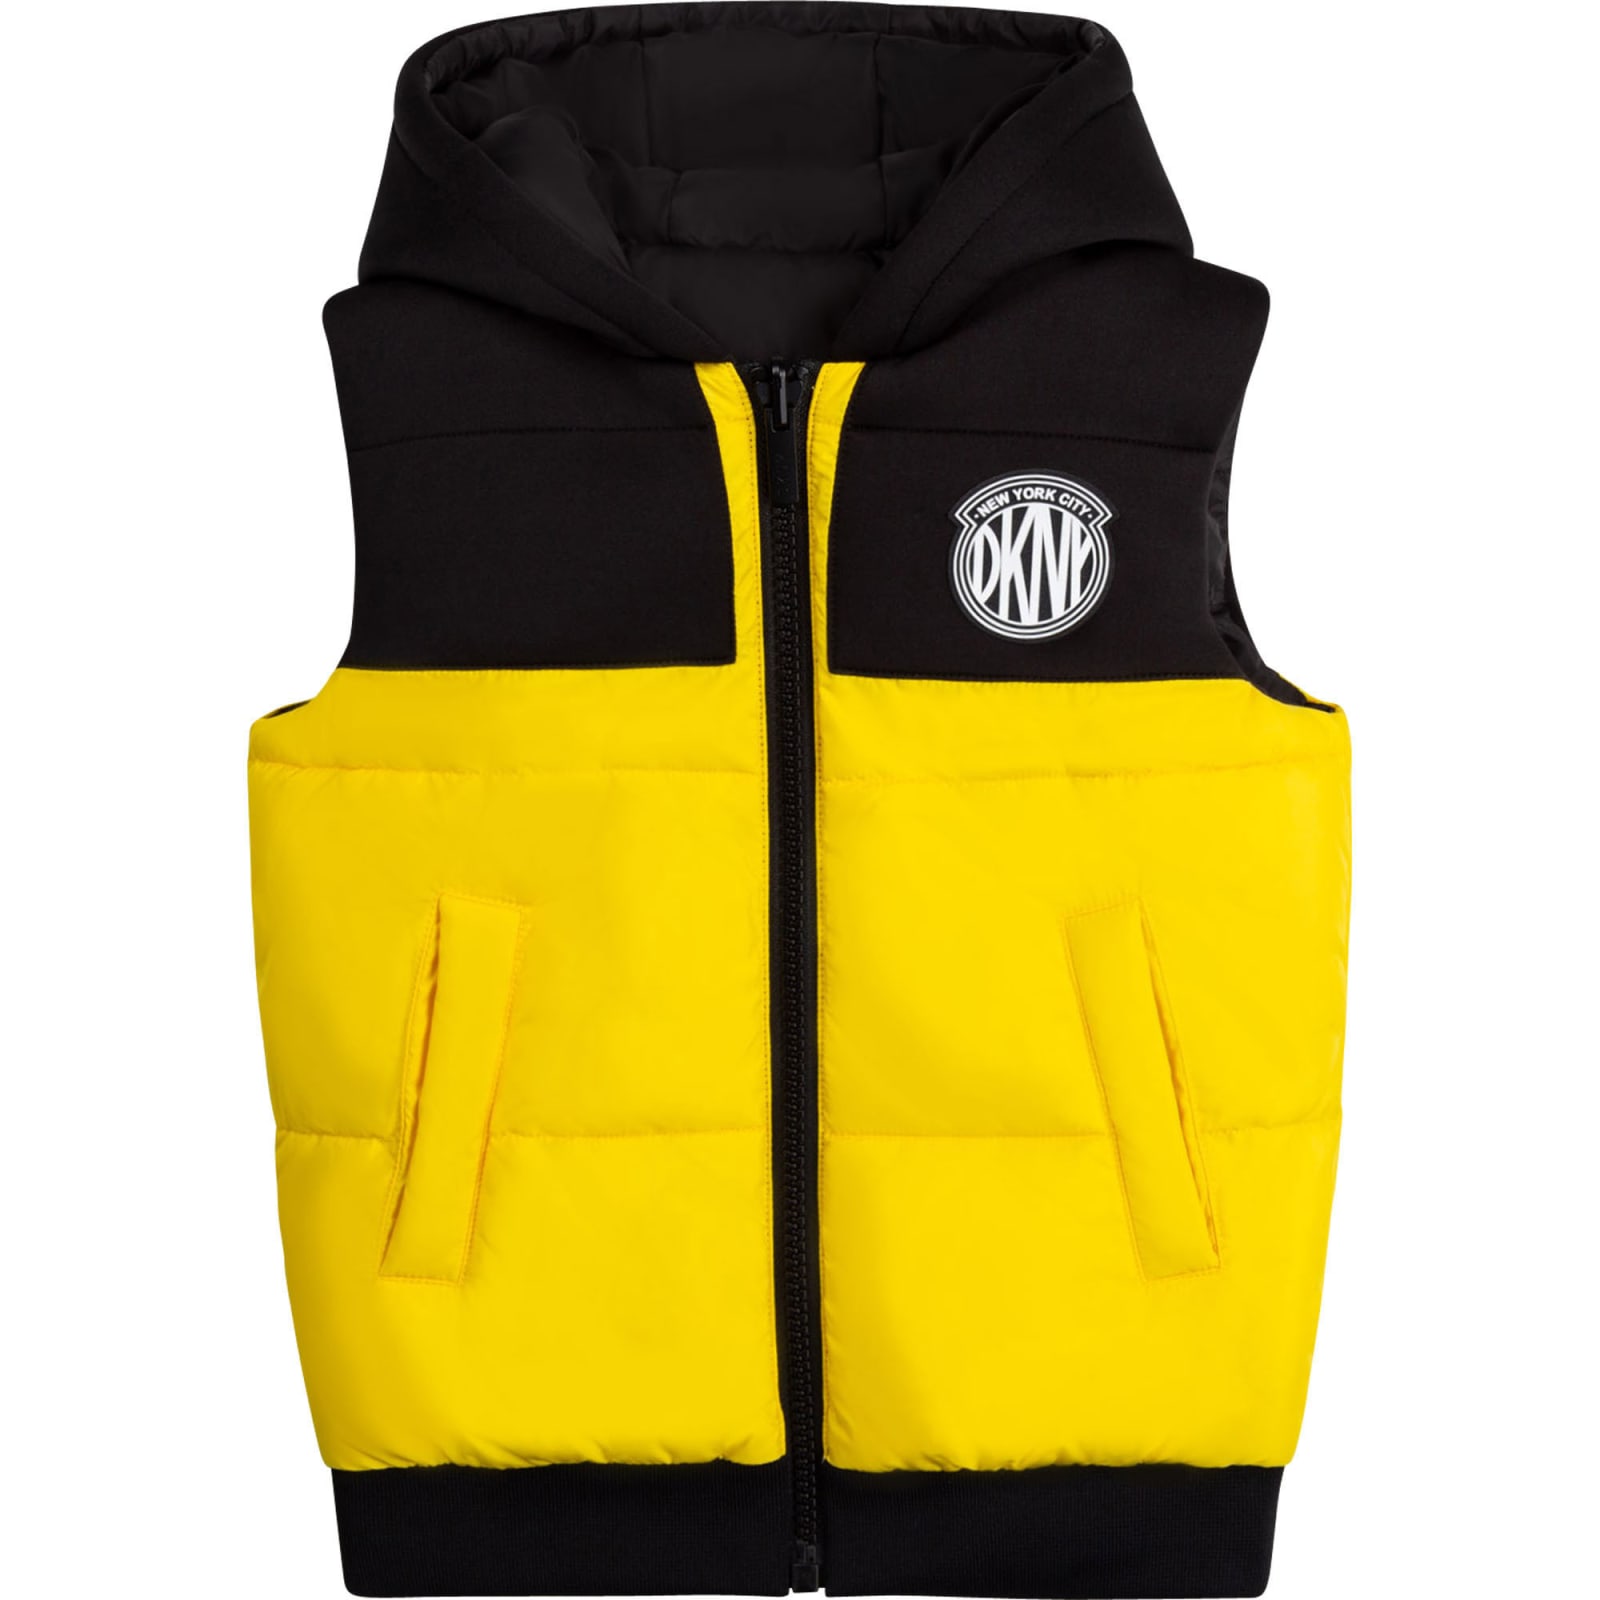 DKNY Reversible Vest With Hood